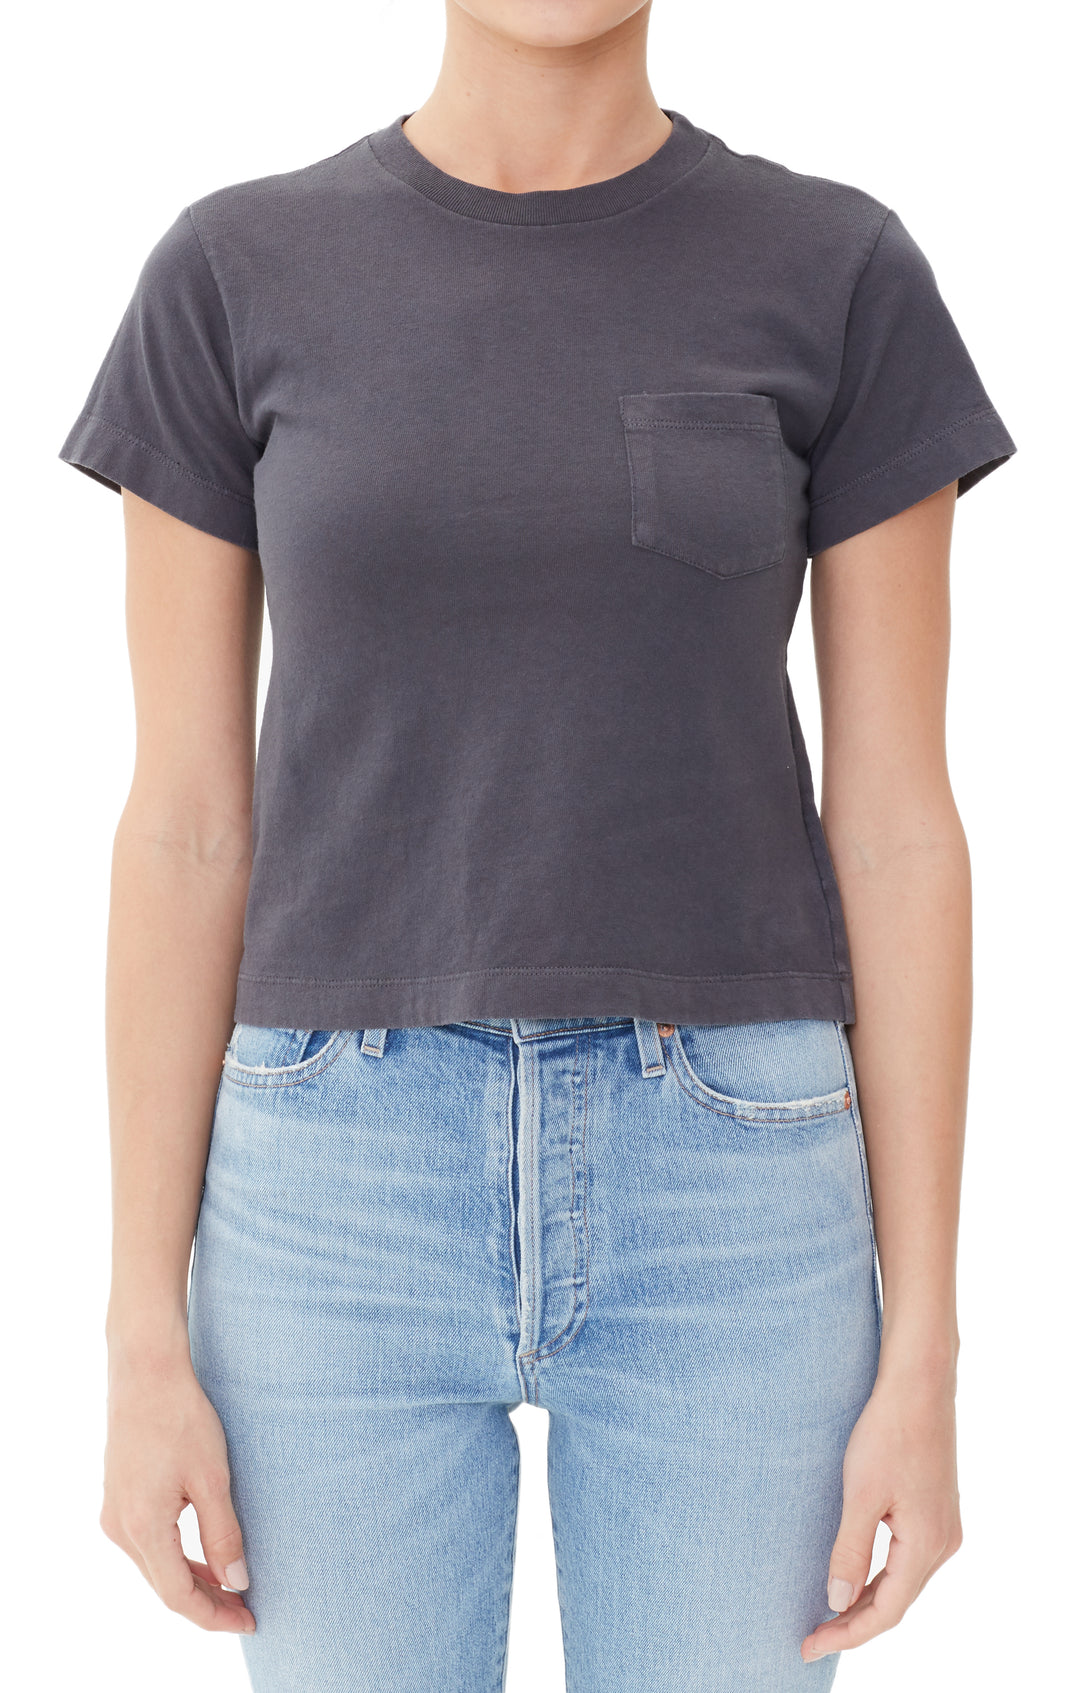 Citizens of Humanity- Grace Pocket Tee in Greystone